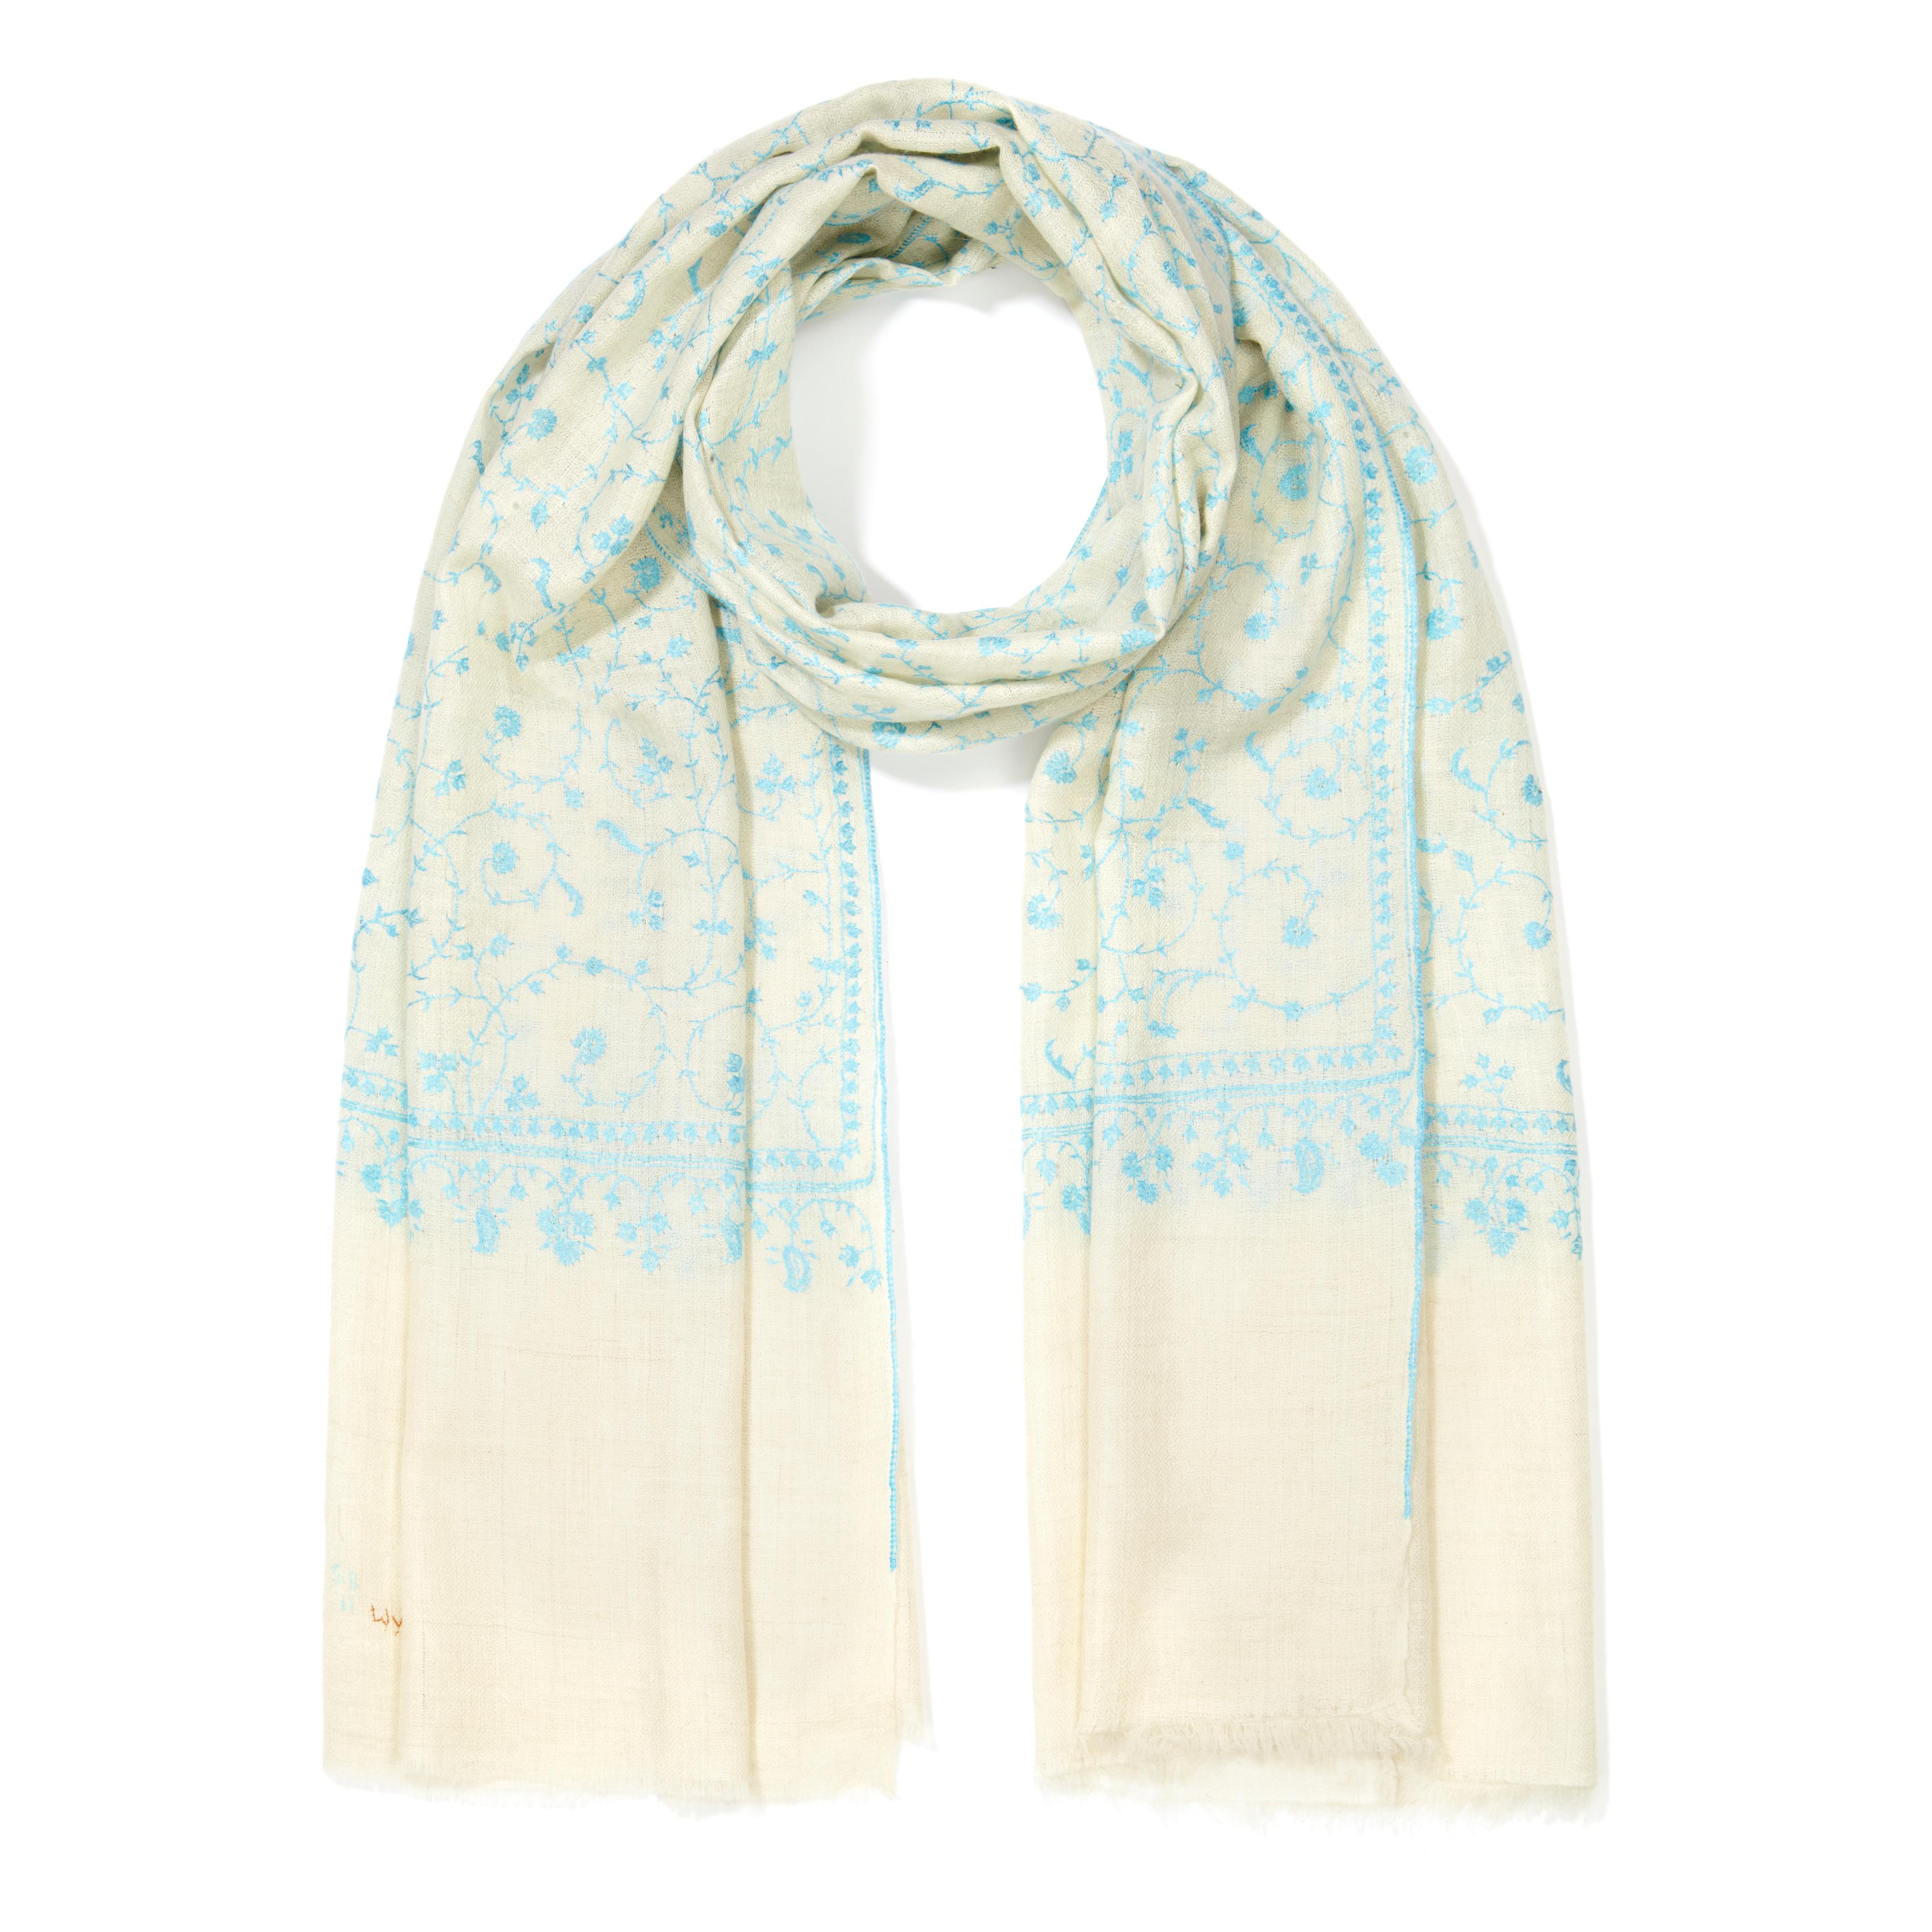 White Limited Edition Hand Embroidered Cashmere Shawl in Ivory & Blue Made in Kashmir